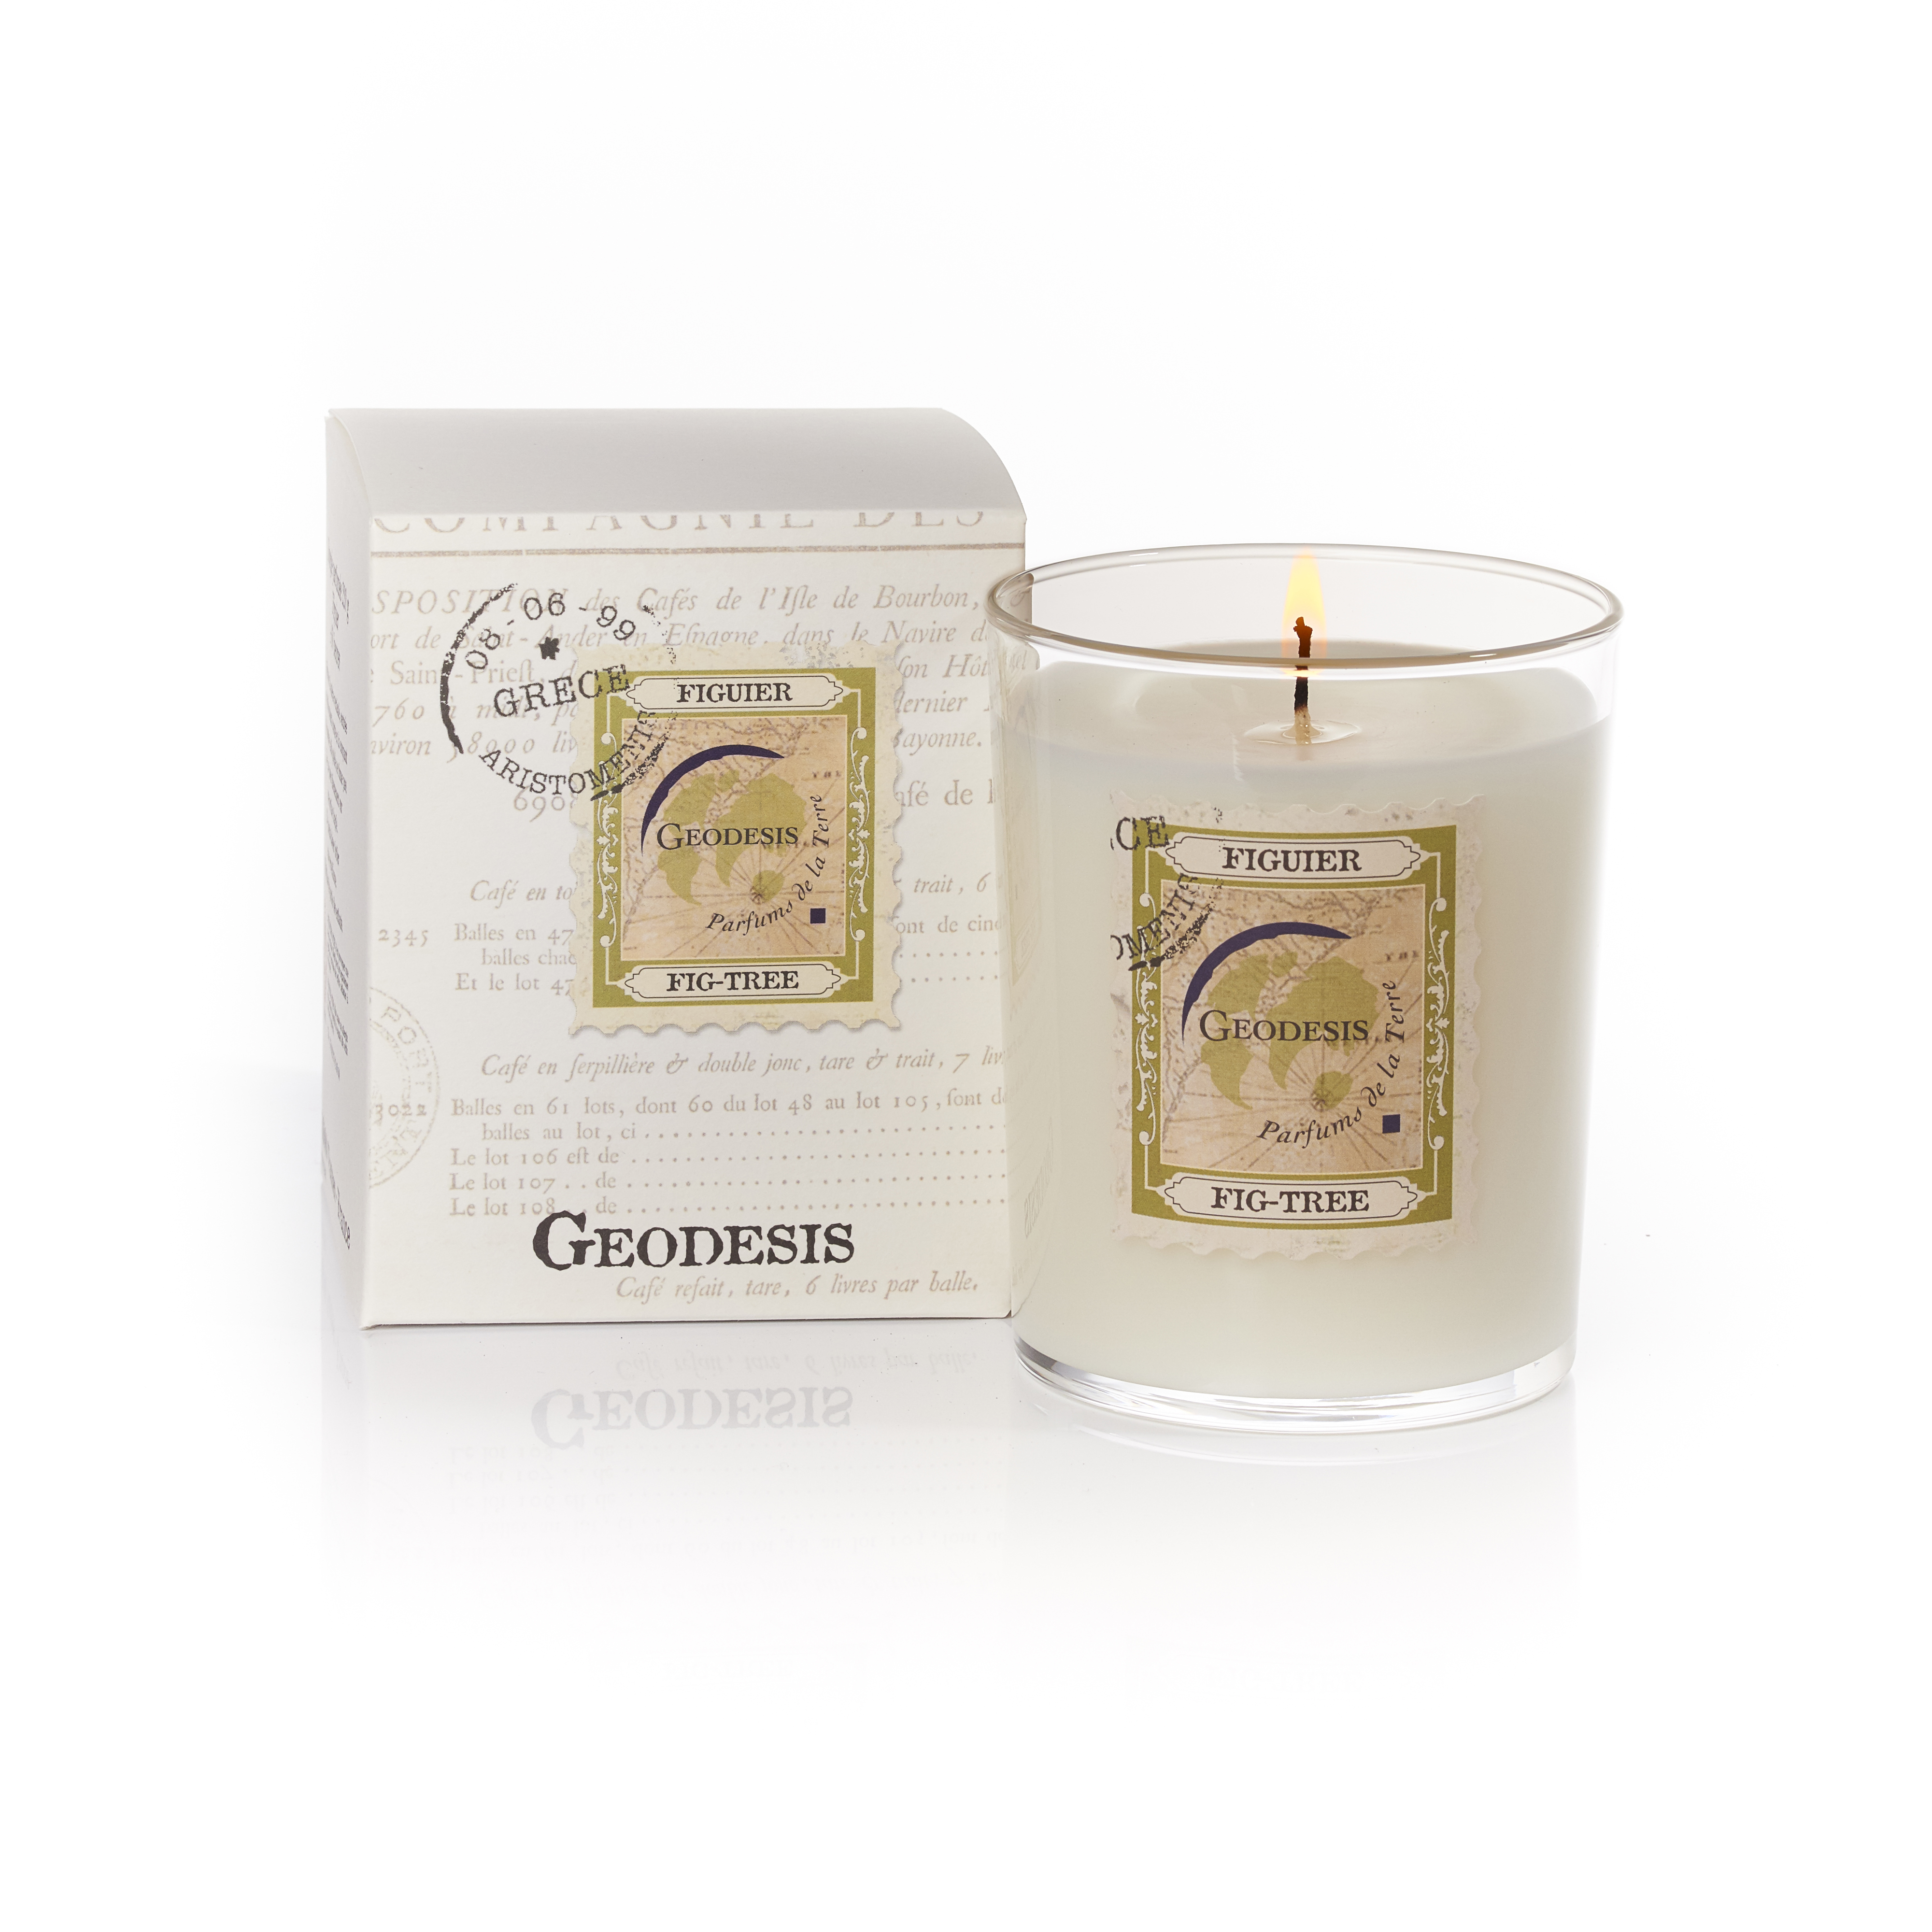 Geodesis Fig Tree Scented Candle 7.8oz | FOUR SEASONS